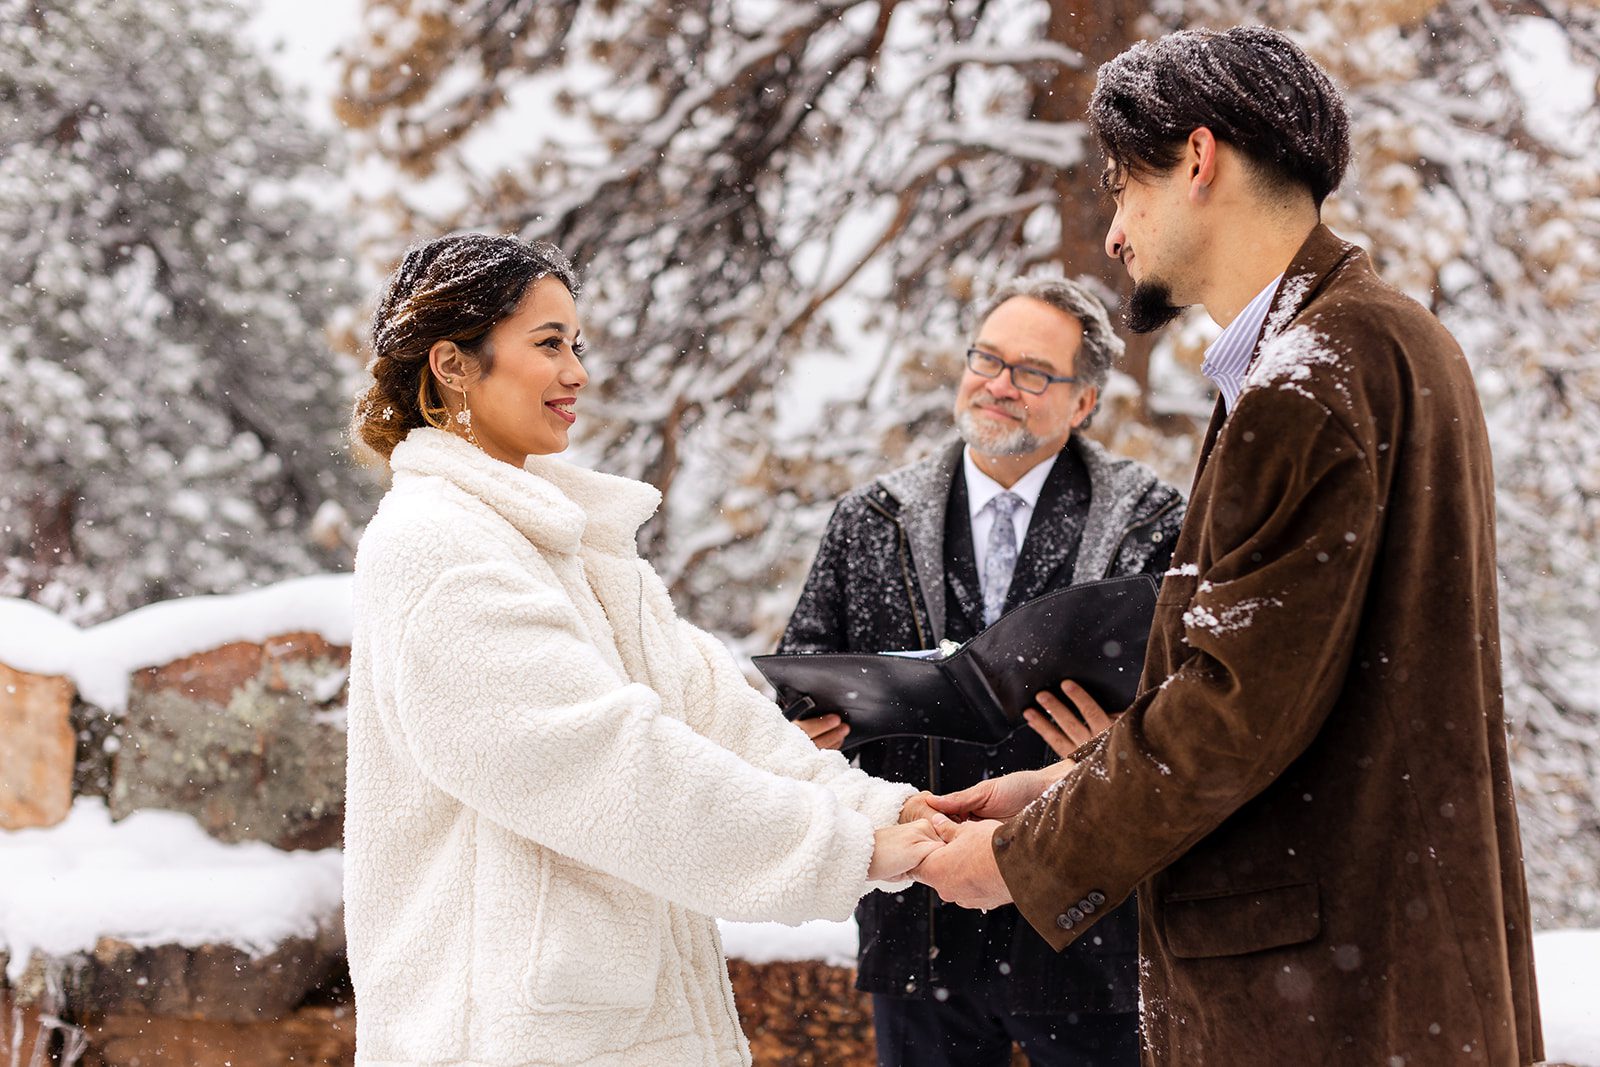 Bride smiling sweetly bundled up in a furry white jacket during her Halfway House elopement ceremony